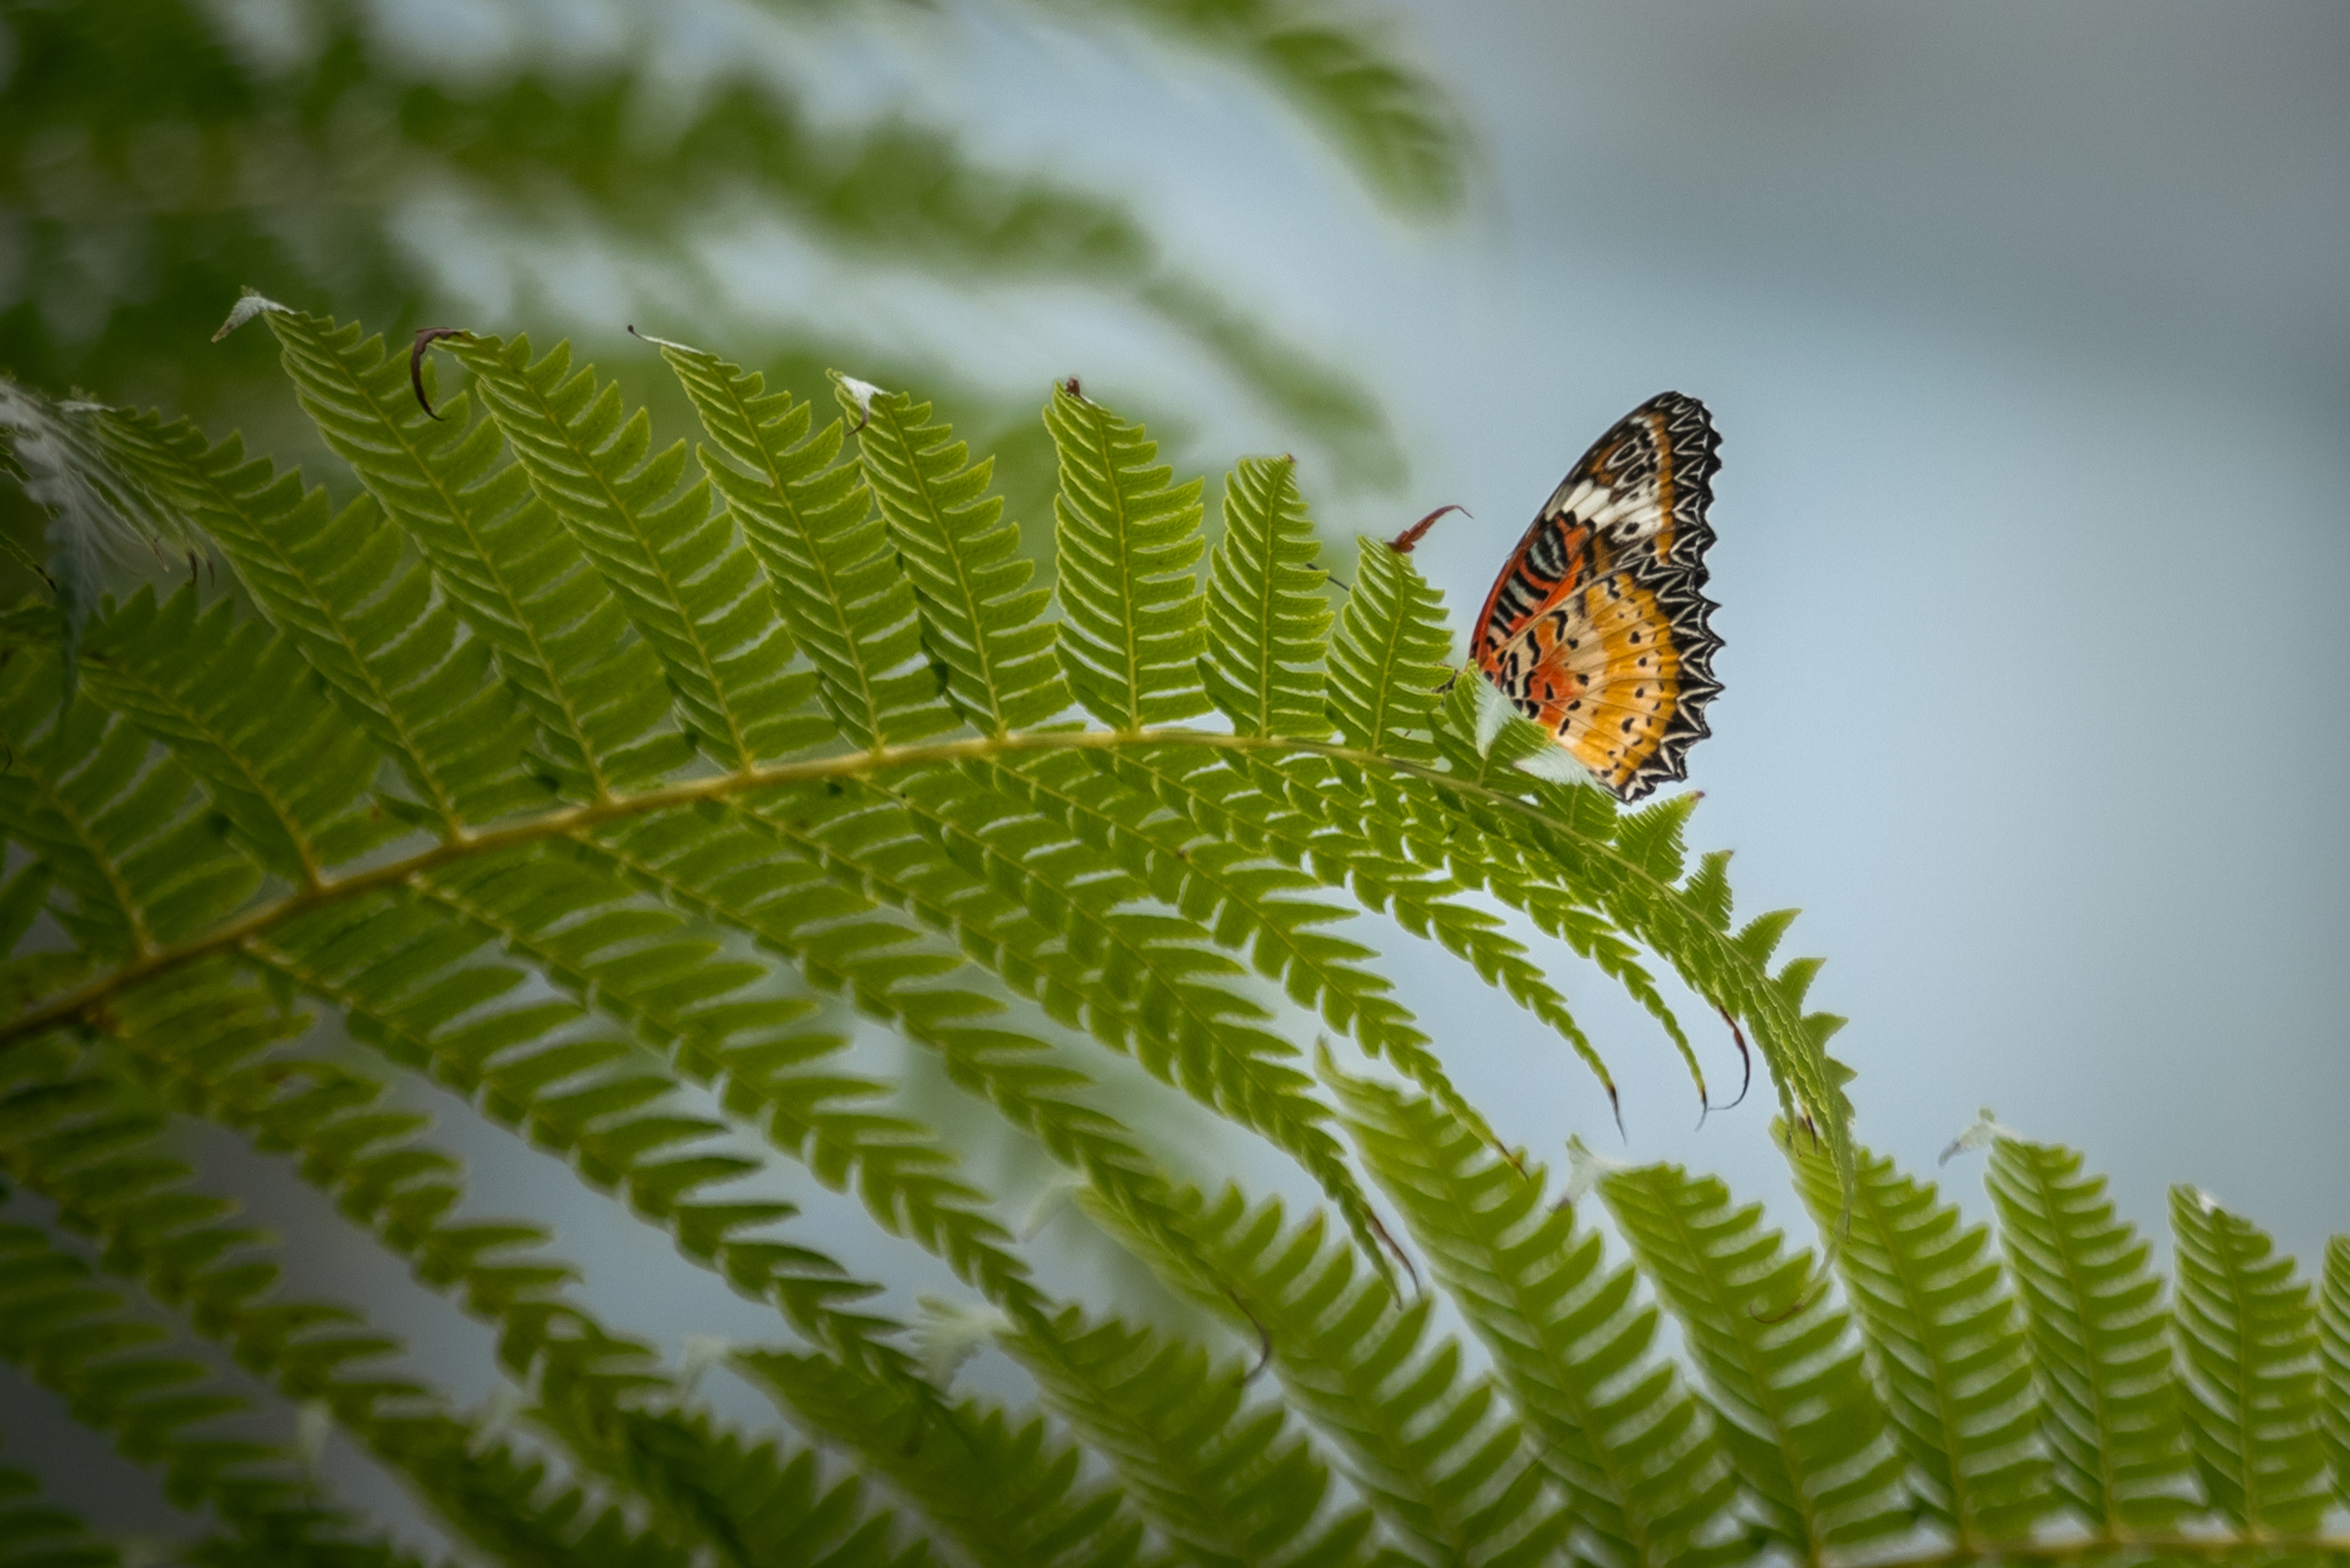 A butterfly rests on a plant.